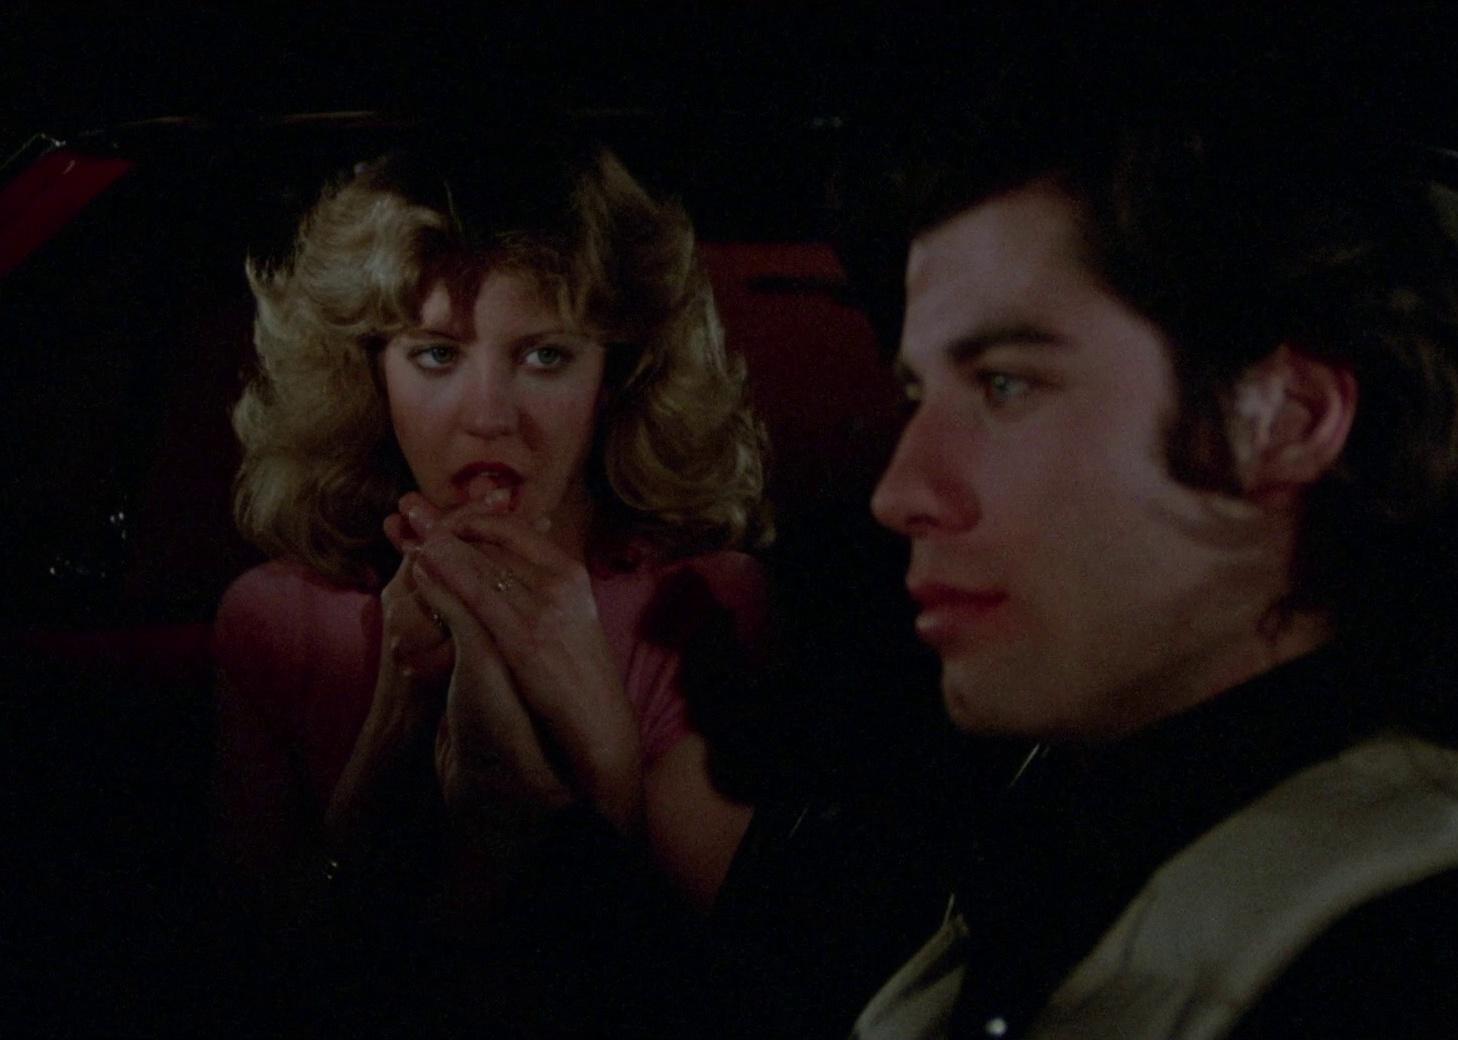 John Travolta in a car with a woman who is licking his hand.